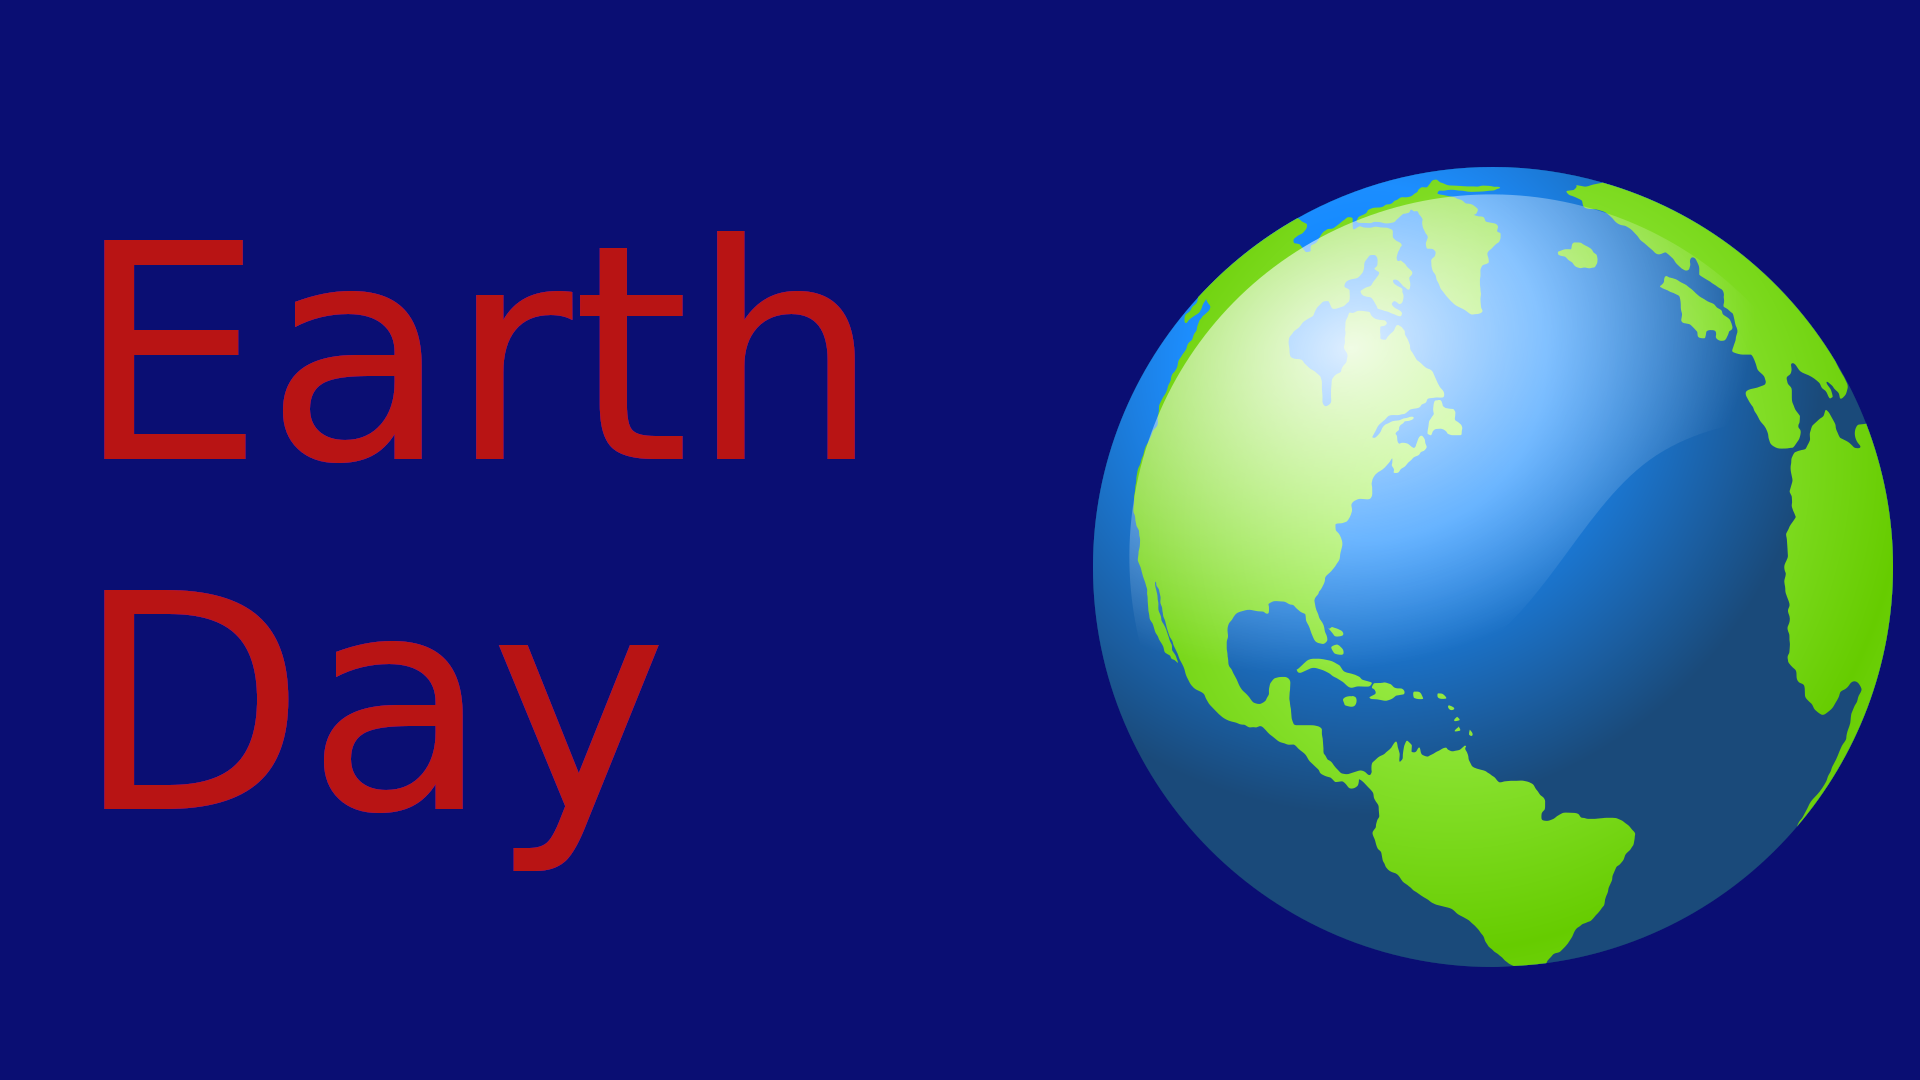 Earth Day - what it means